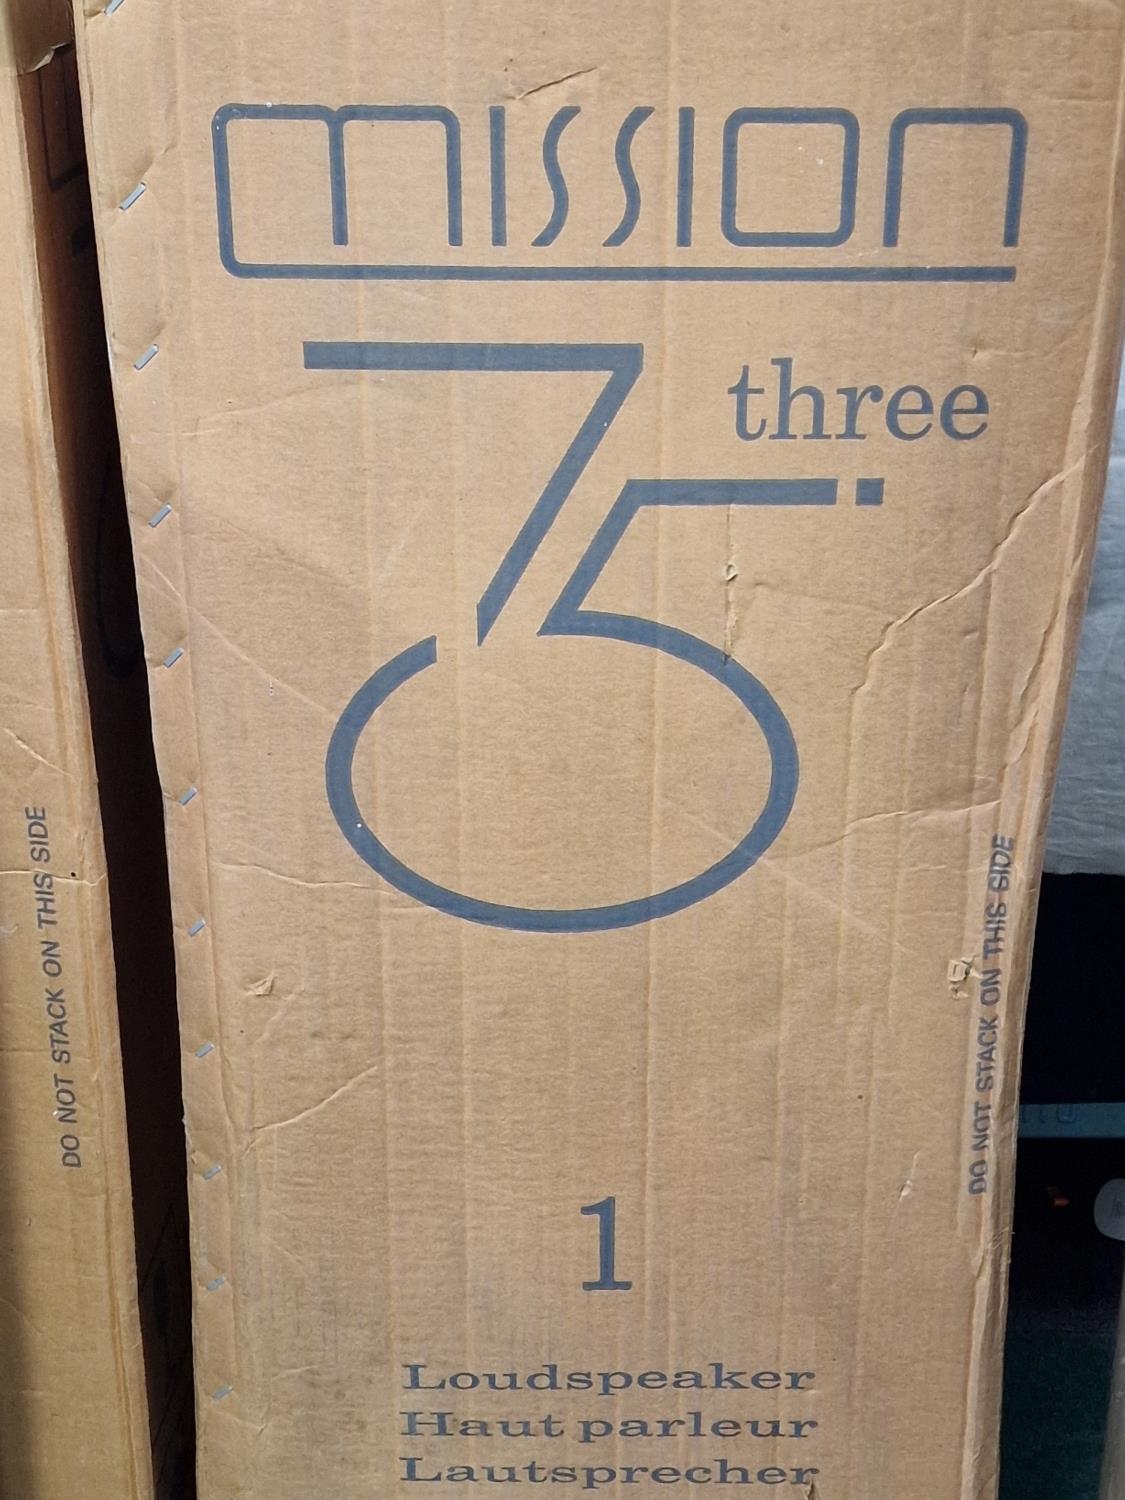 Mission 753 Floor Standing Speakers found here in black cabinets and having their original boxes. - Image 2 of 2